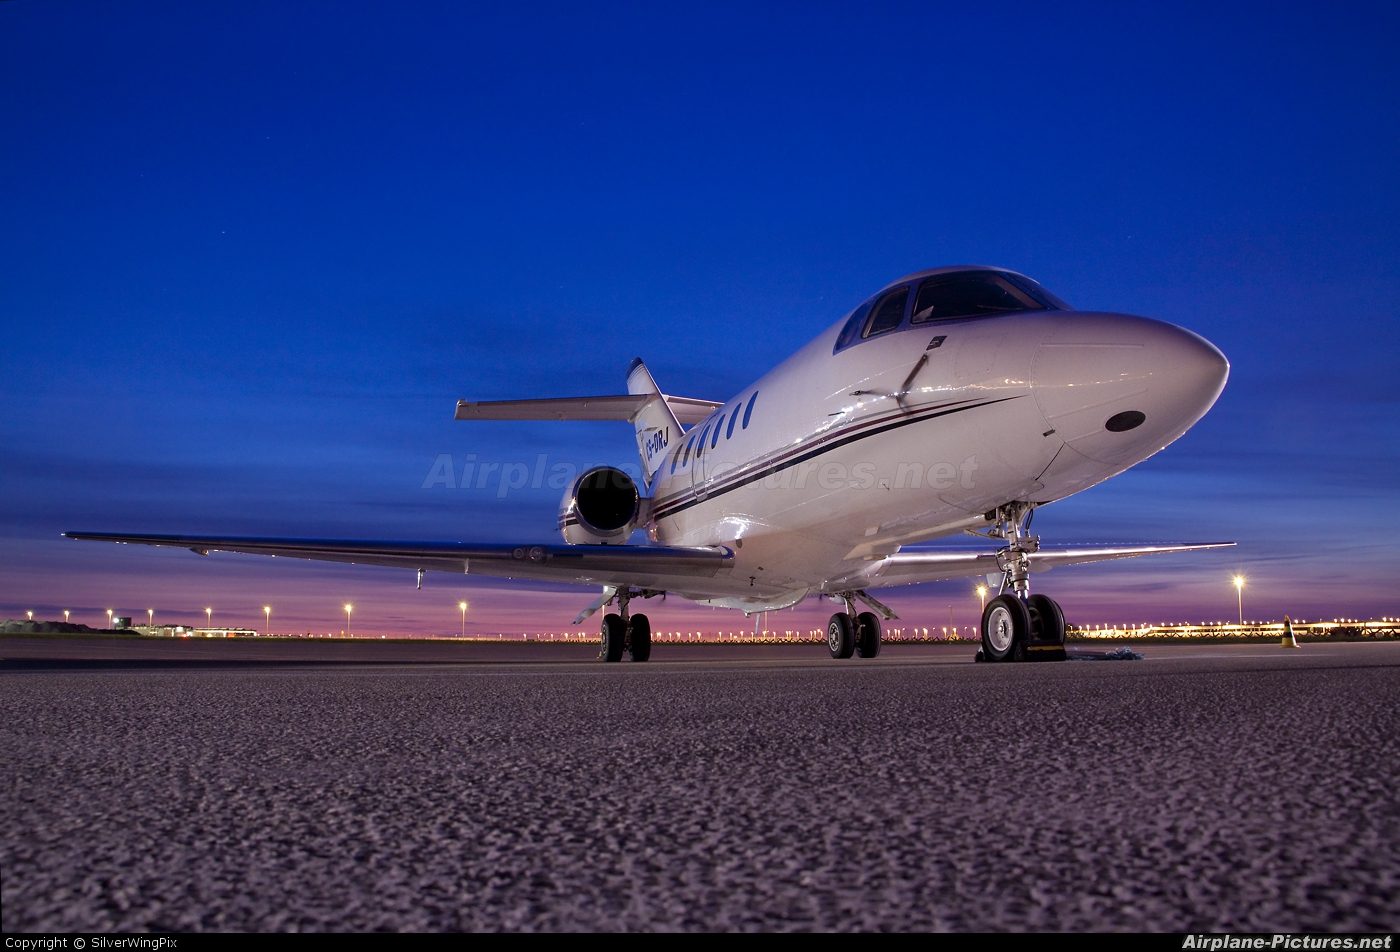 NetJets Europe (Portugal) CS-DRJ aircraft at Undisclosed location